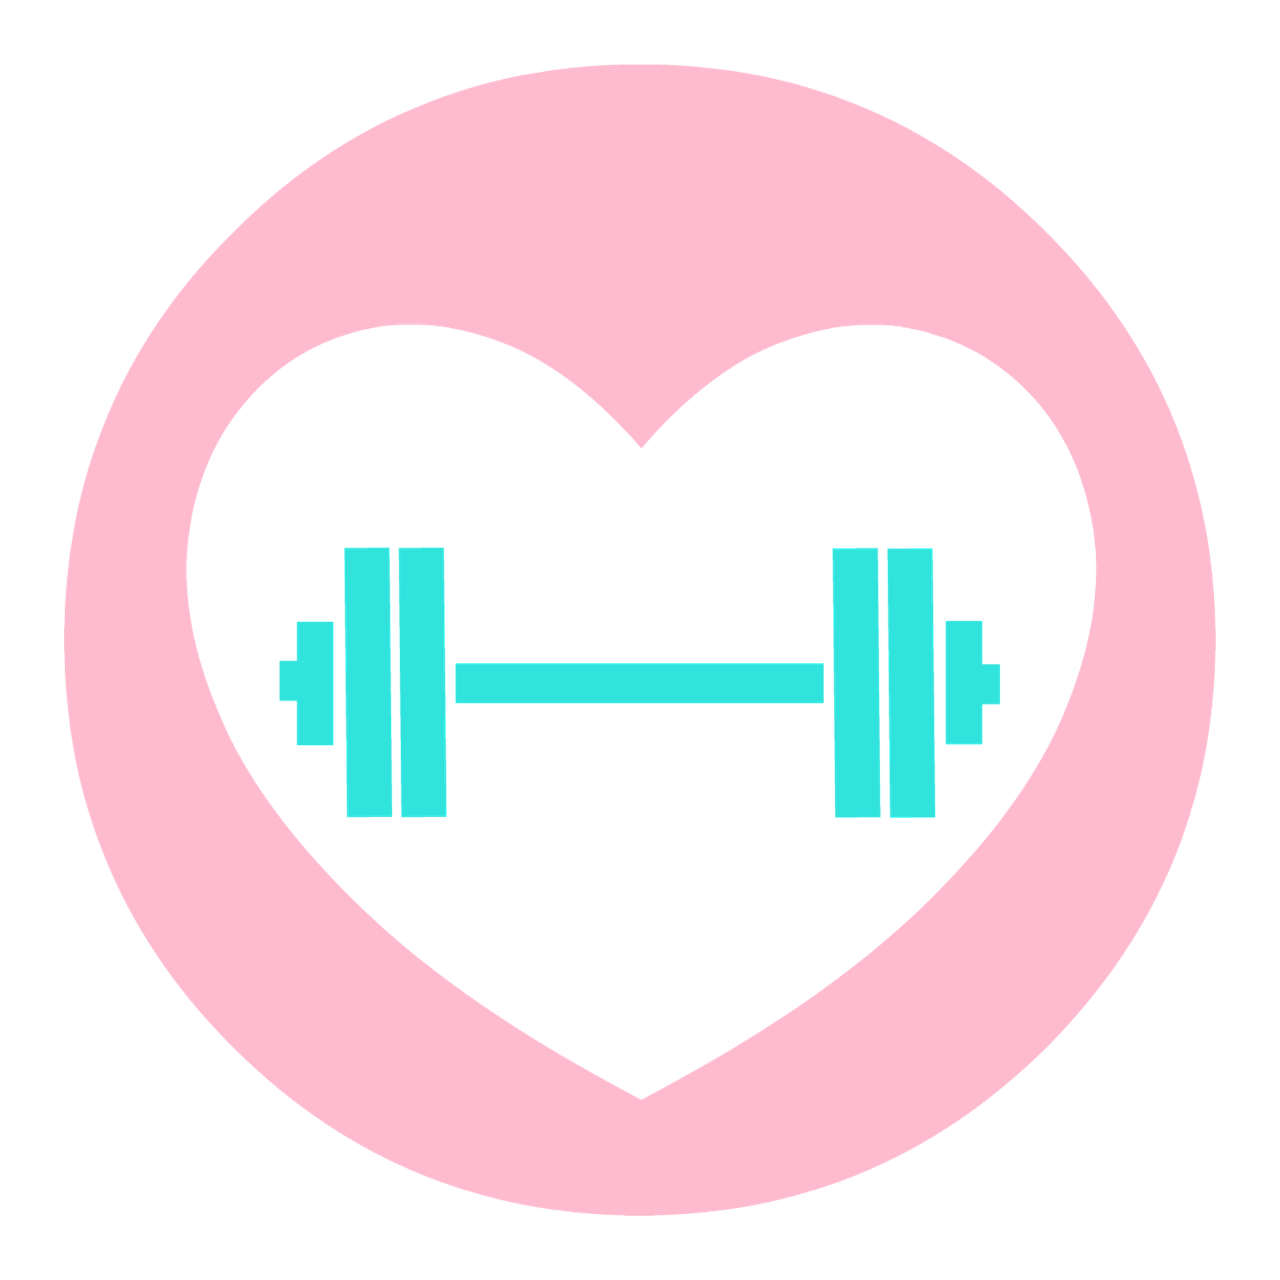 Work out,exercise,dumb bells,pink,heart - free image from